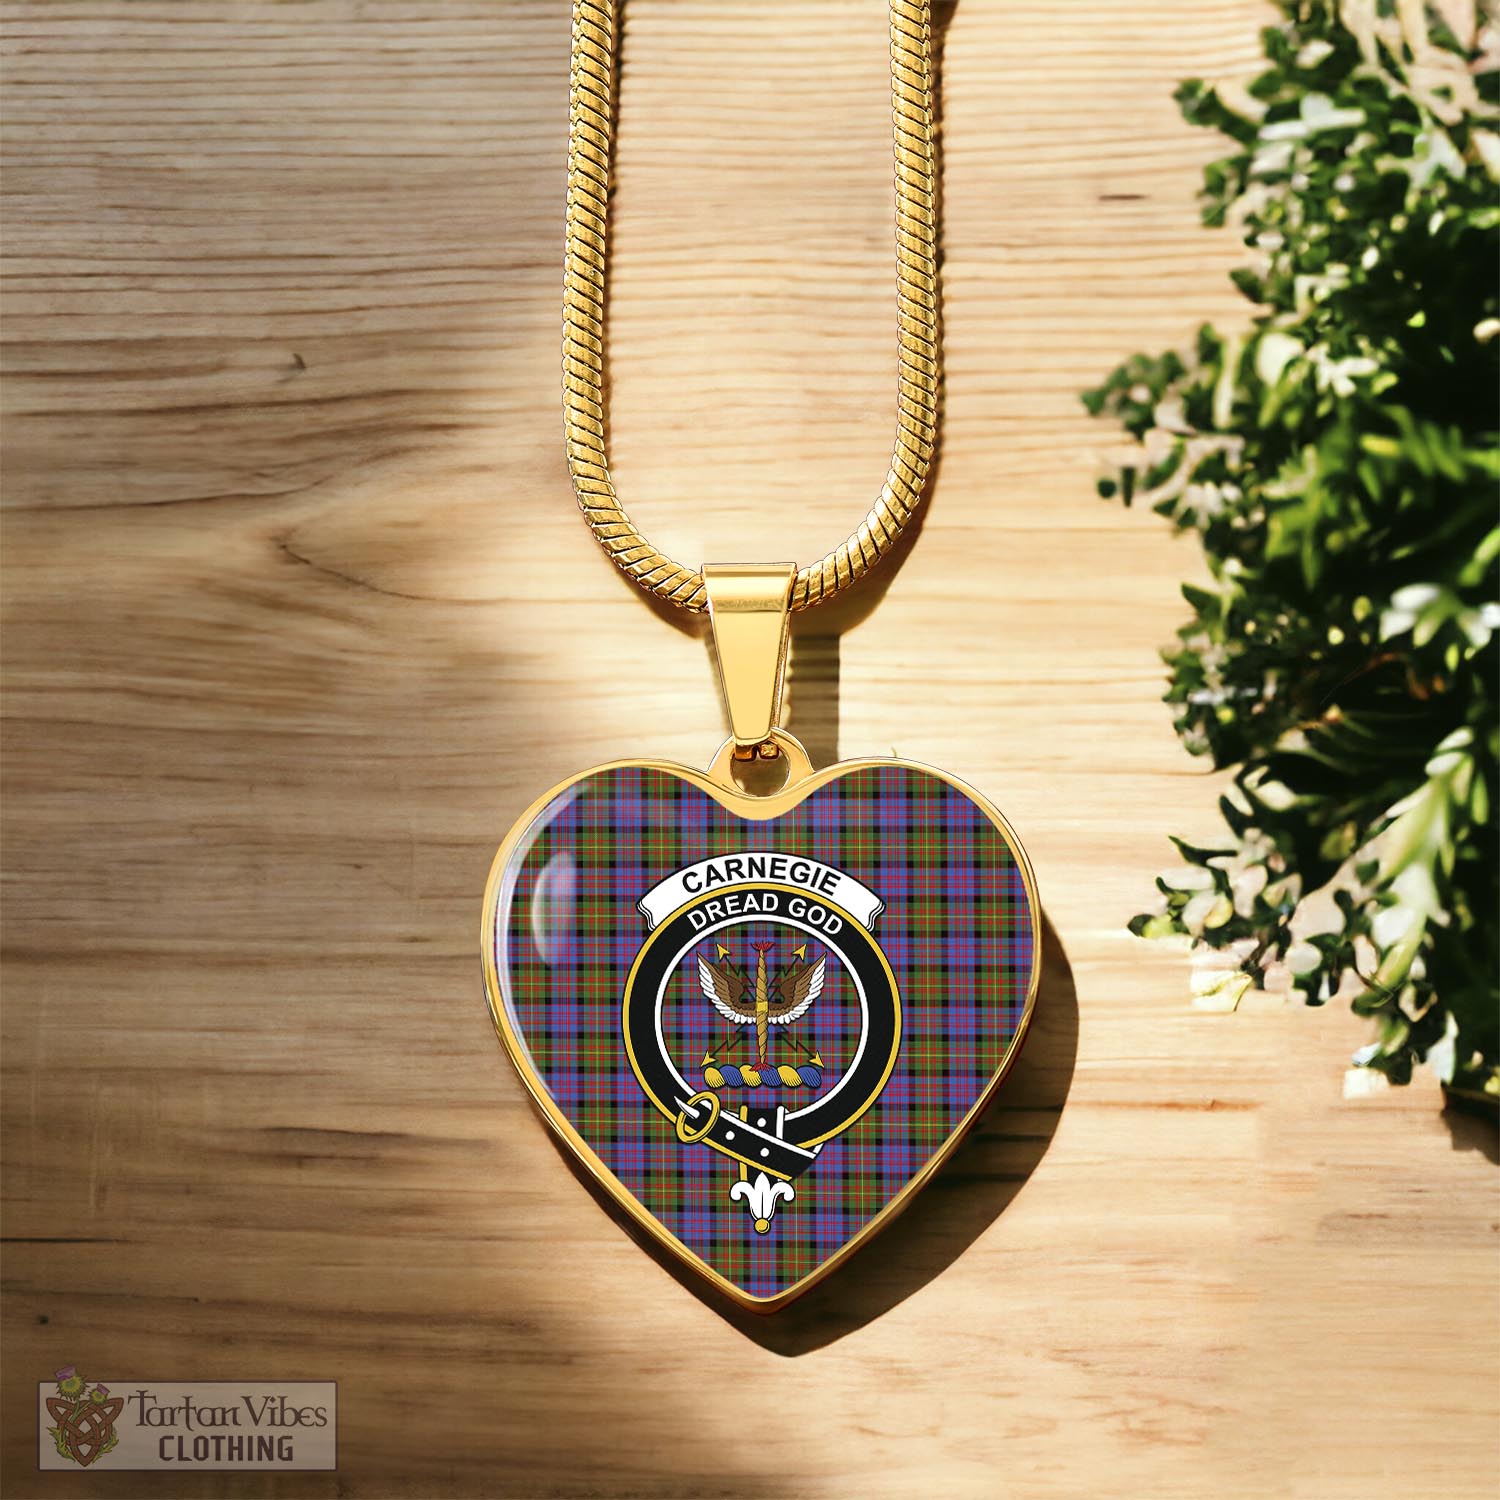 Tartan Vibes Clothing Carnegie Ancient Tartan Heart Necklace with Family Crest